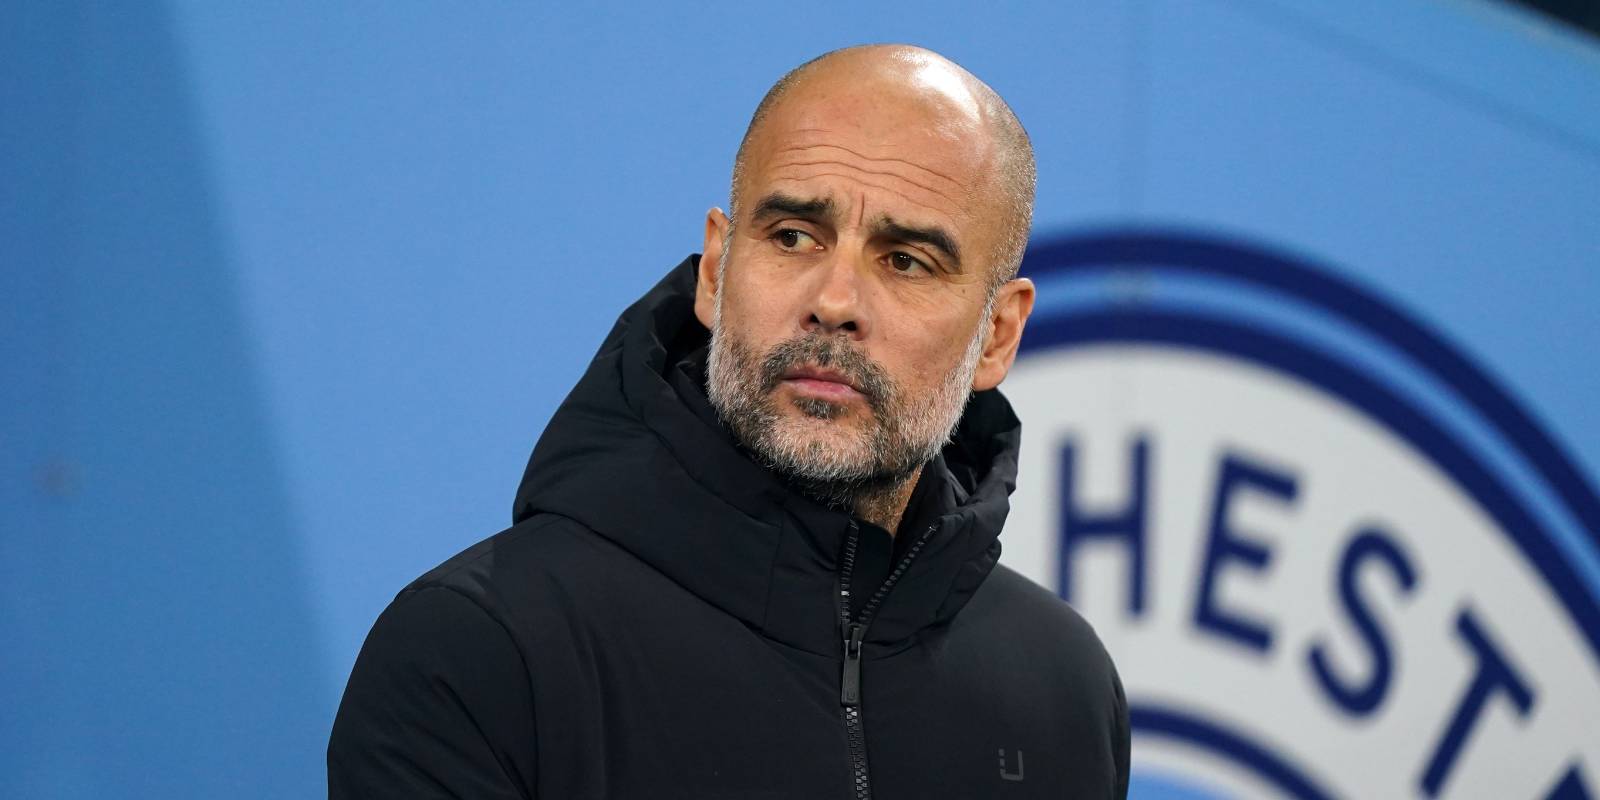 europapress 4950949 27 january 2023 united kingdom manchester manchester city manager pep 1 - Guardiola se queja del Manchester City